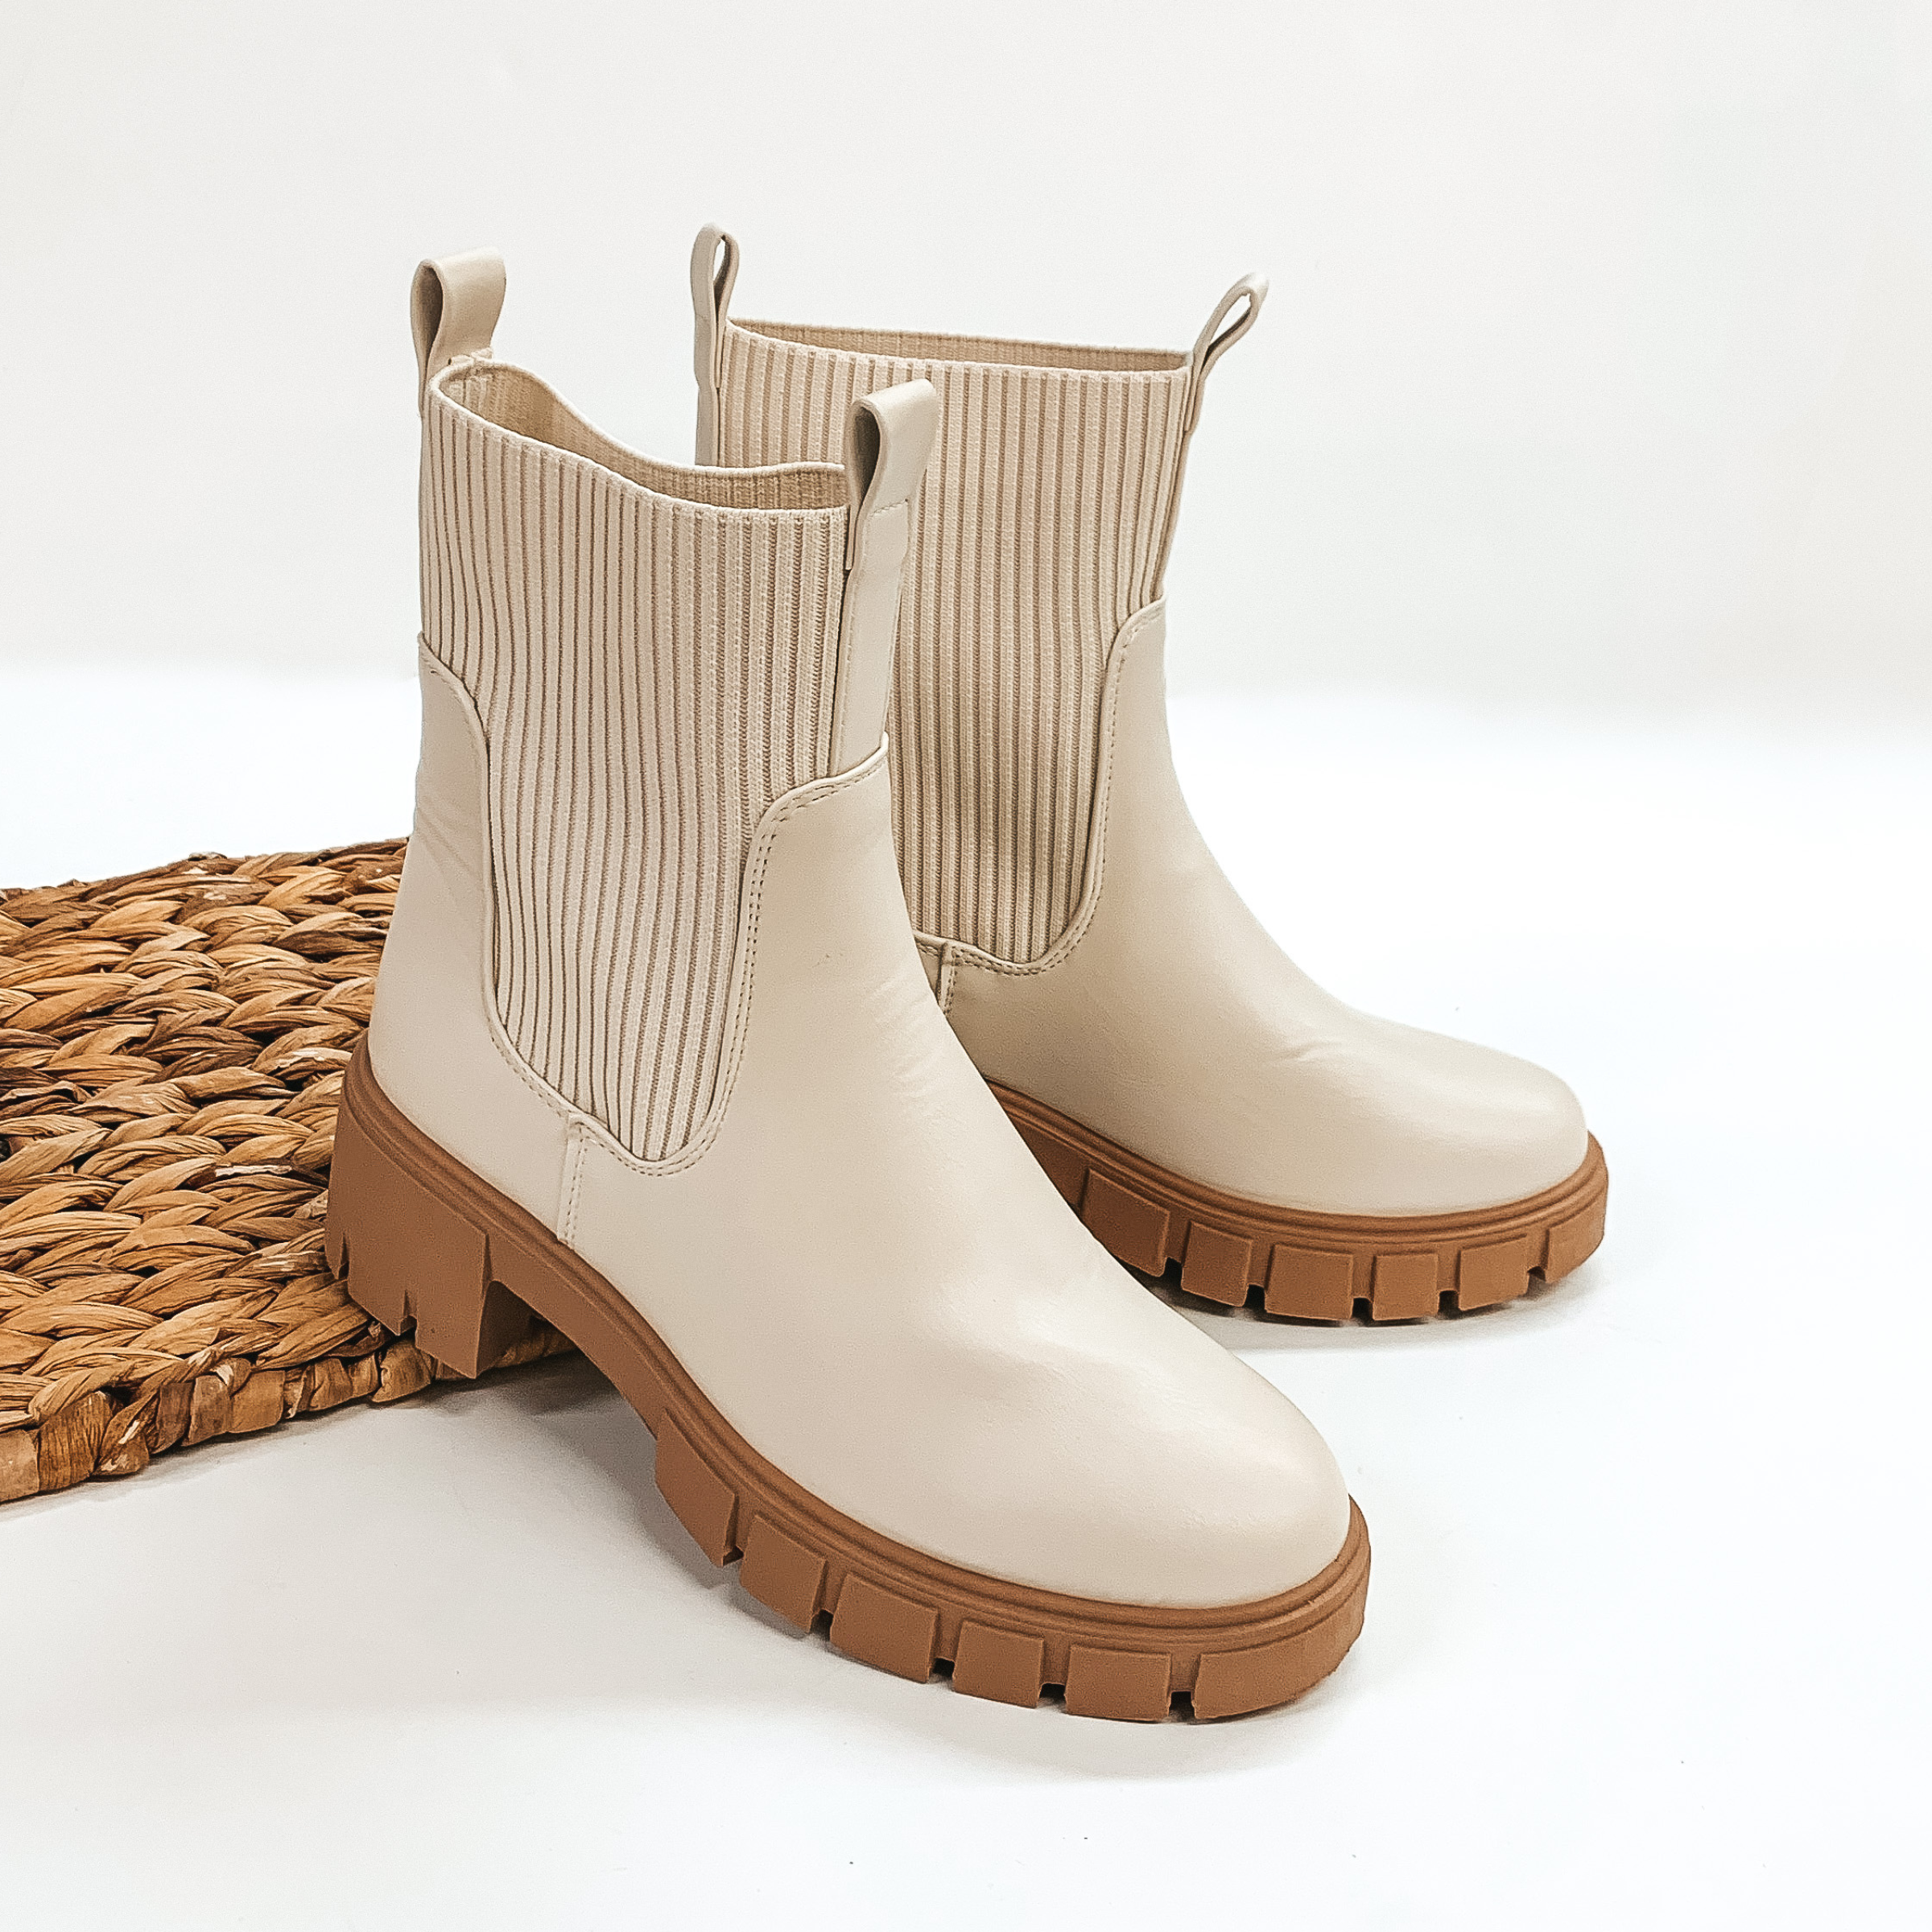 Ankle high off white colored slip on bootie with a tan sole. The sides are elastic and also have a front and back pull on tab. These booties are pictured propped on a basket weave material on a white background. 